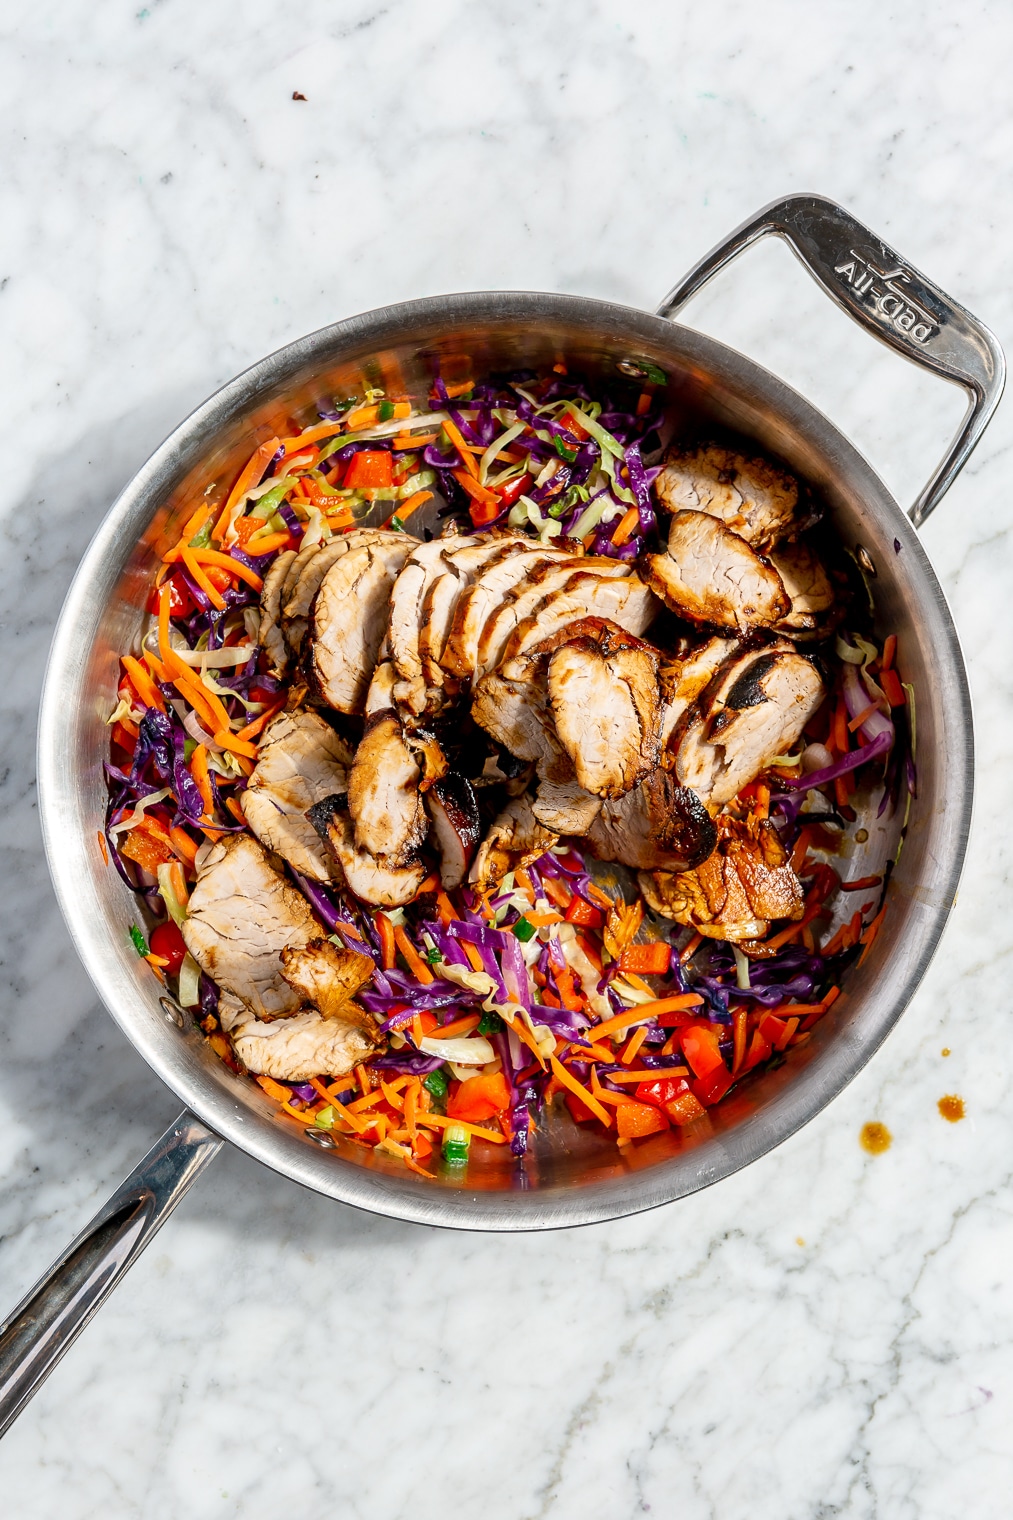 Pork and veggie stir fry in a stainless steel pan.